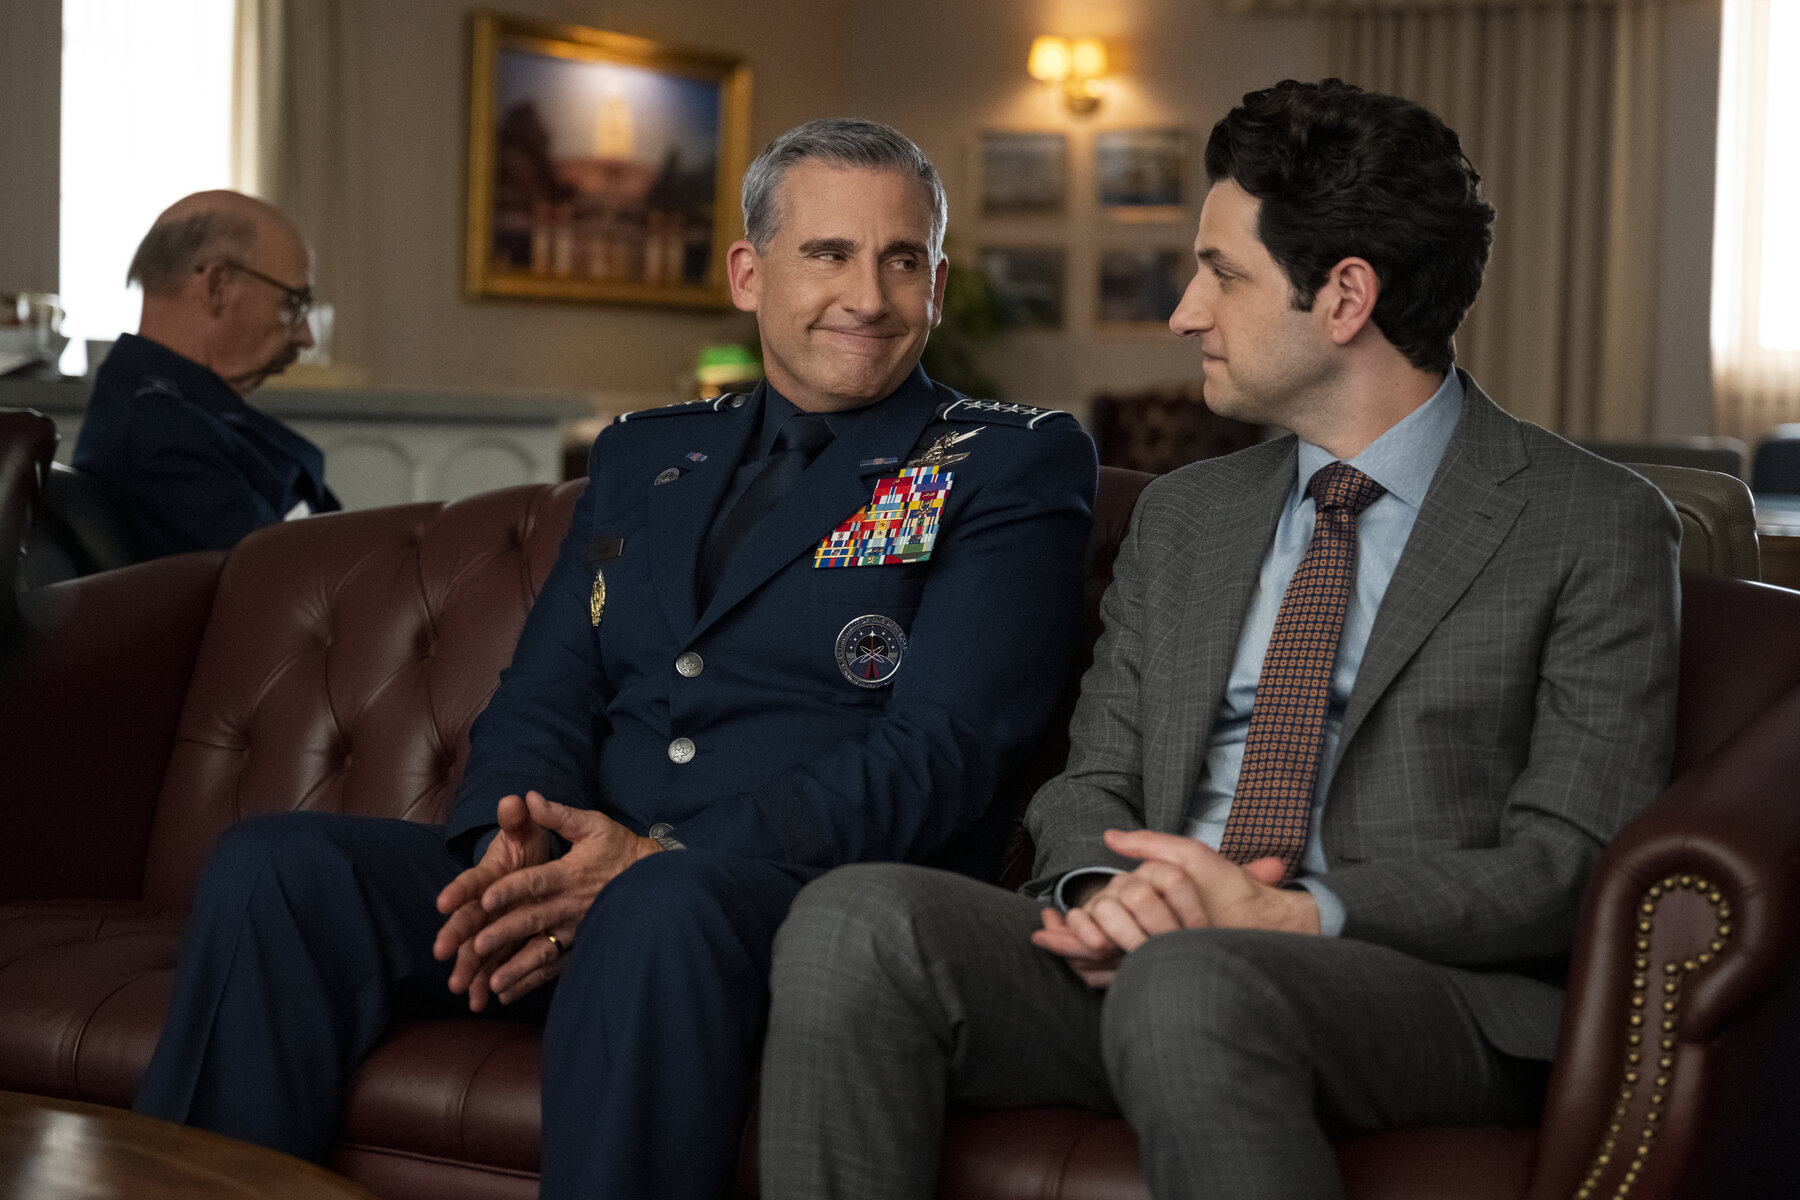 Steve Carell as General Mark Naird and Ben Schwartz as F. Tony Scarapiducci in season two of the Netflix series "Space Force"